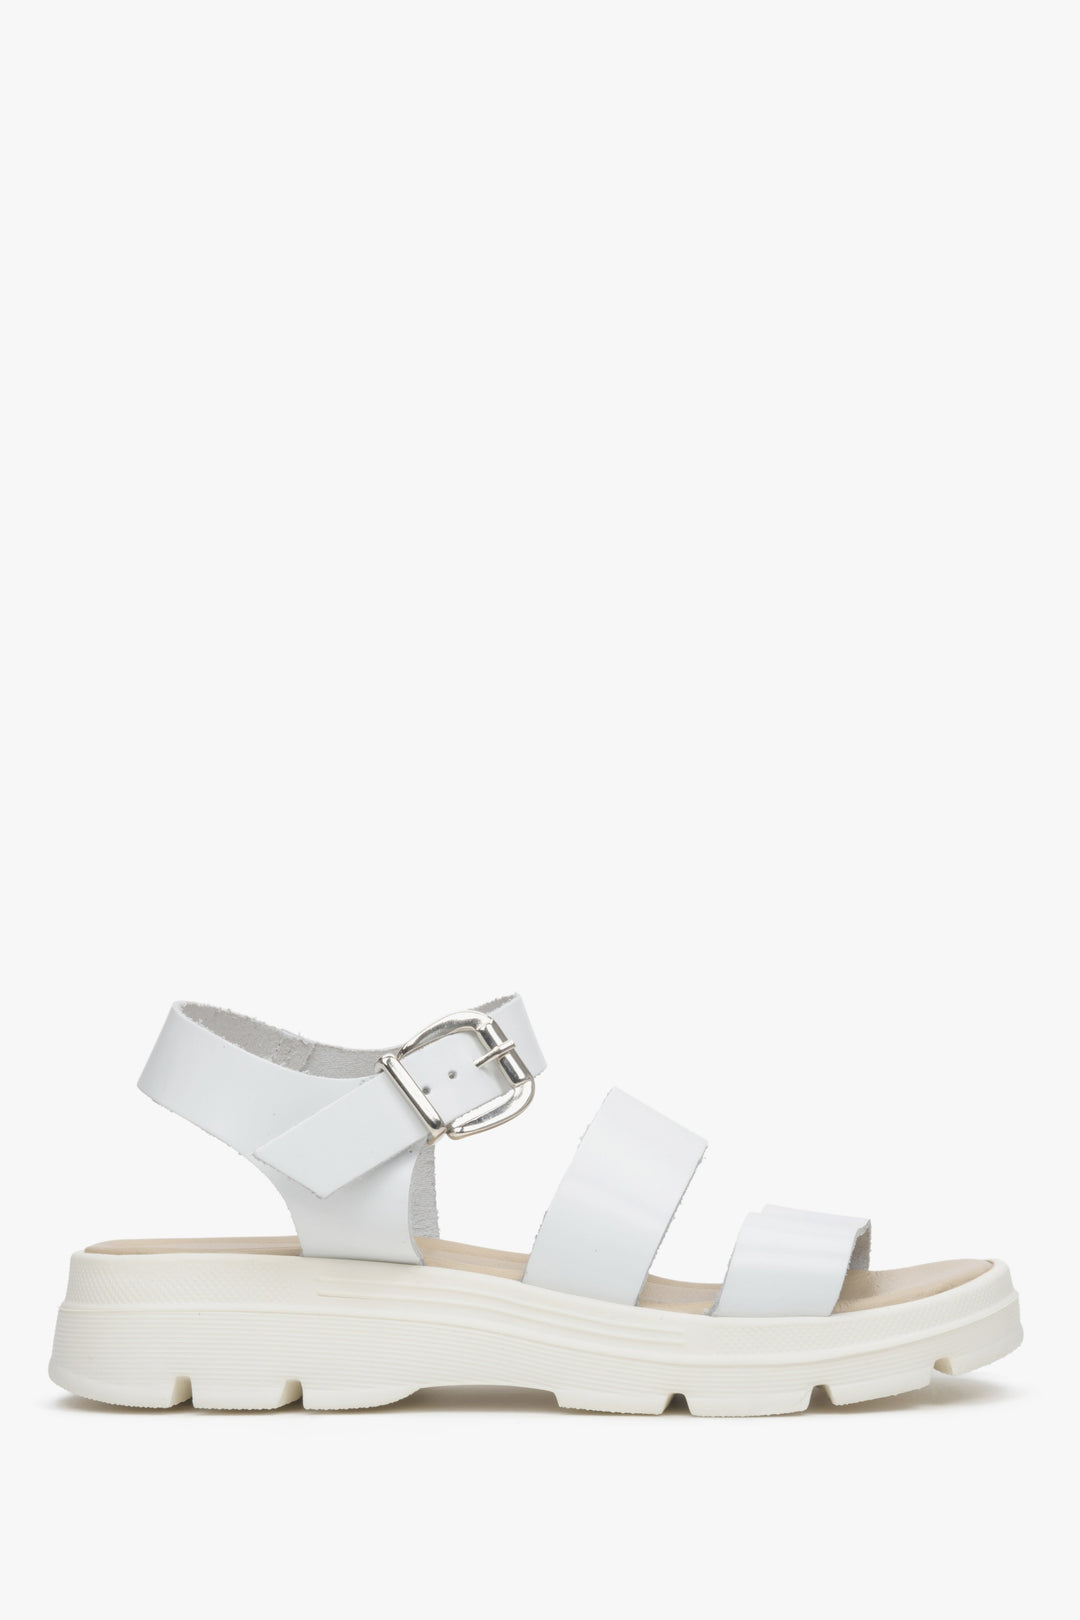 White Chunky Platform Women's Sandals with a Buckle Estro ER00113115